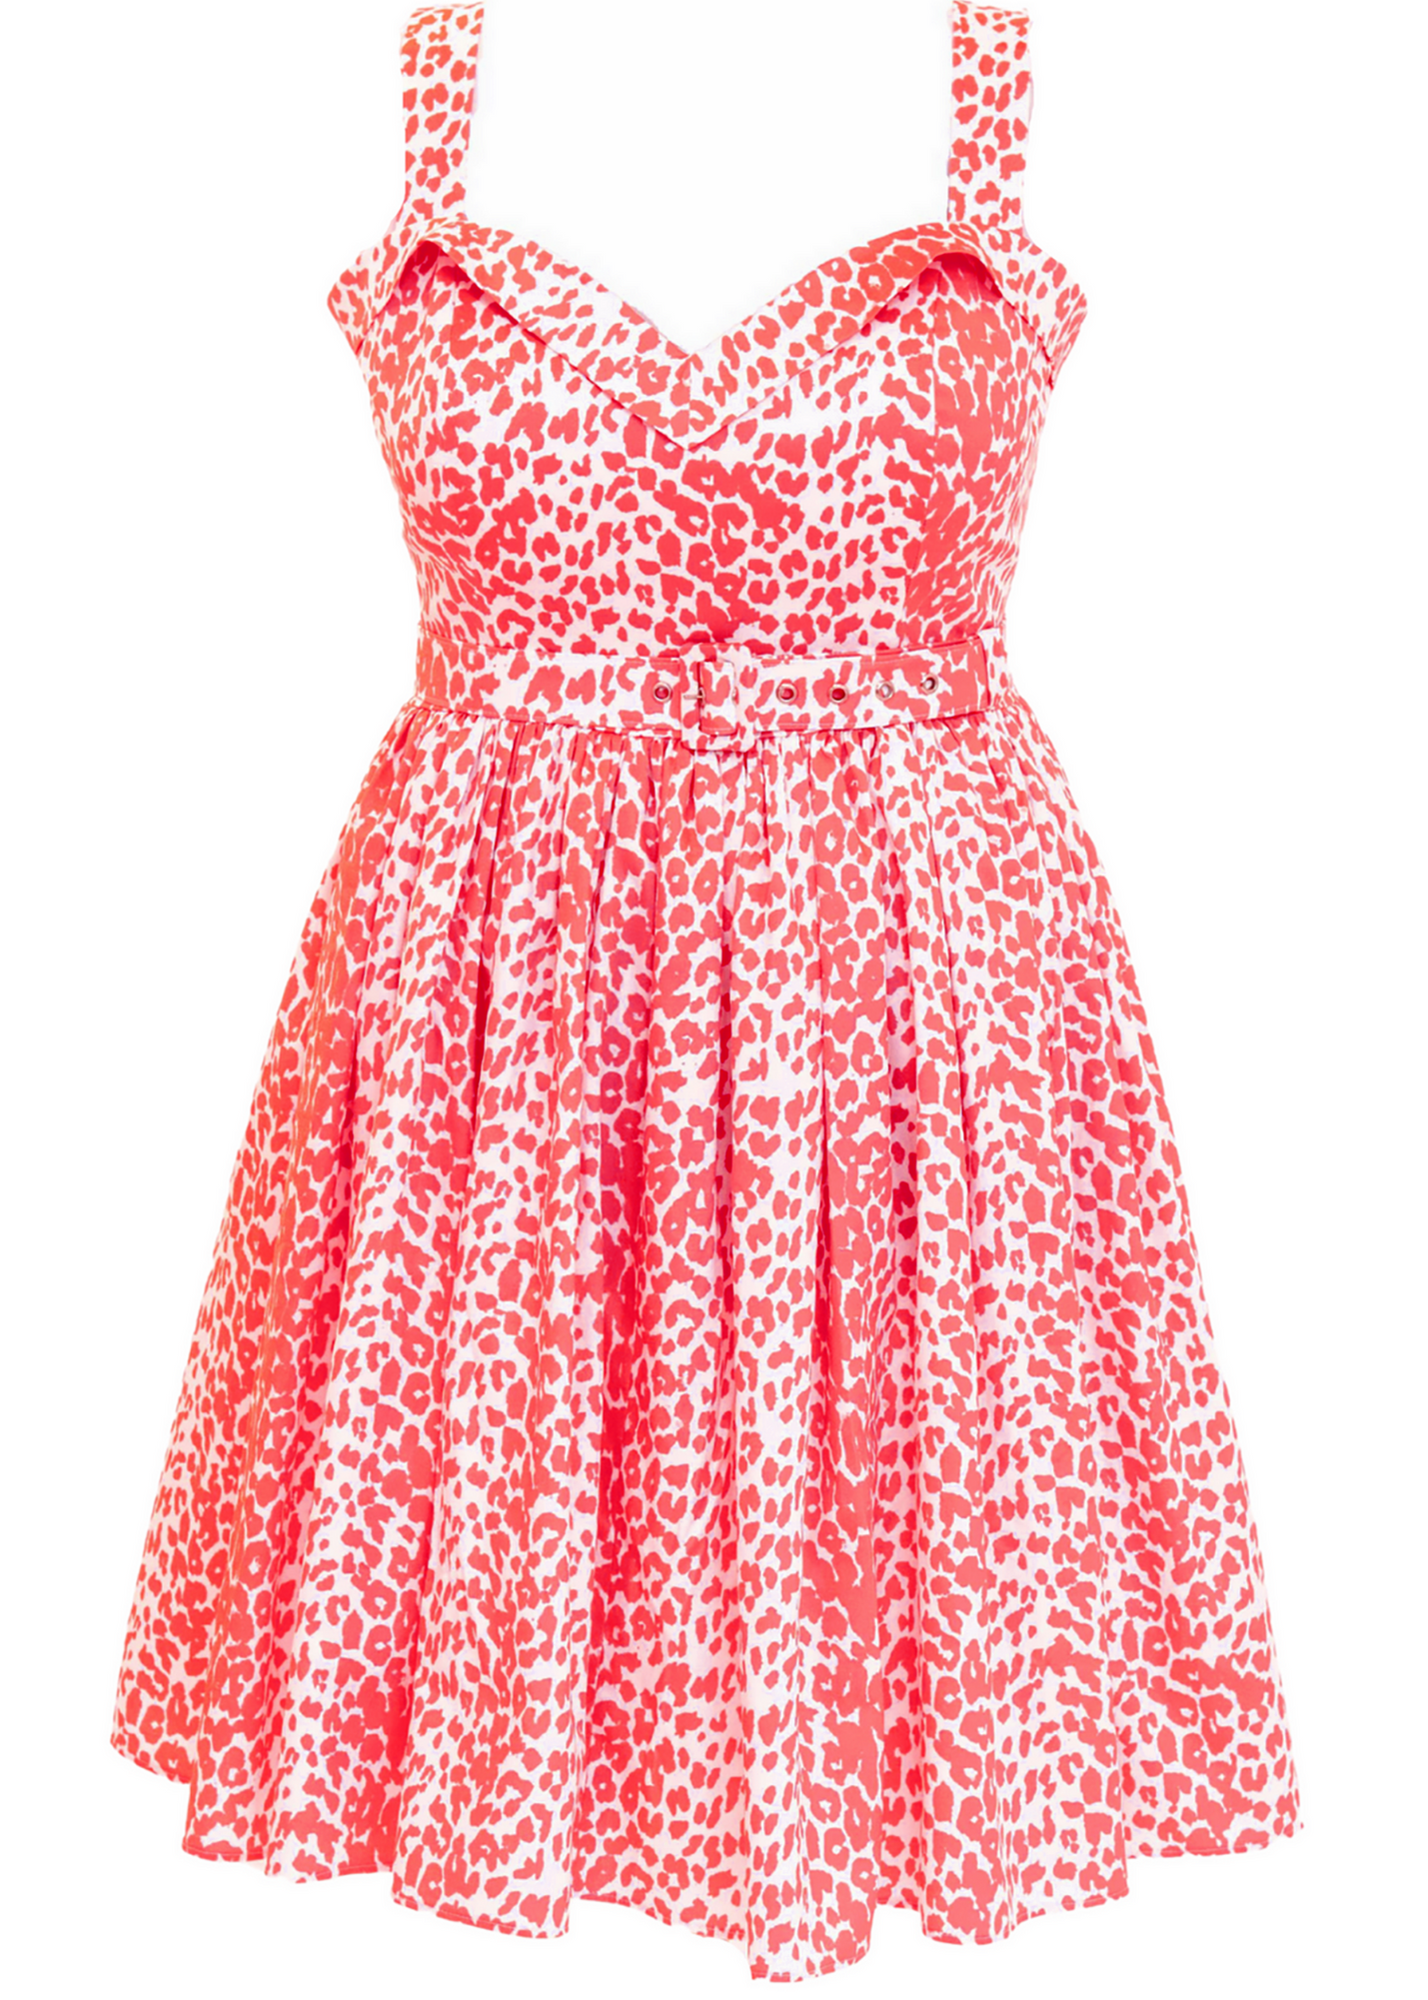 The Marilyn Dress Coral Leopard Print